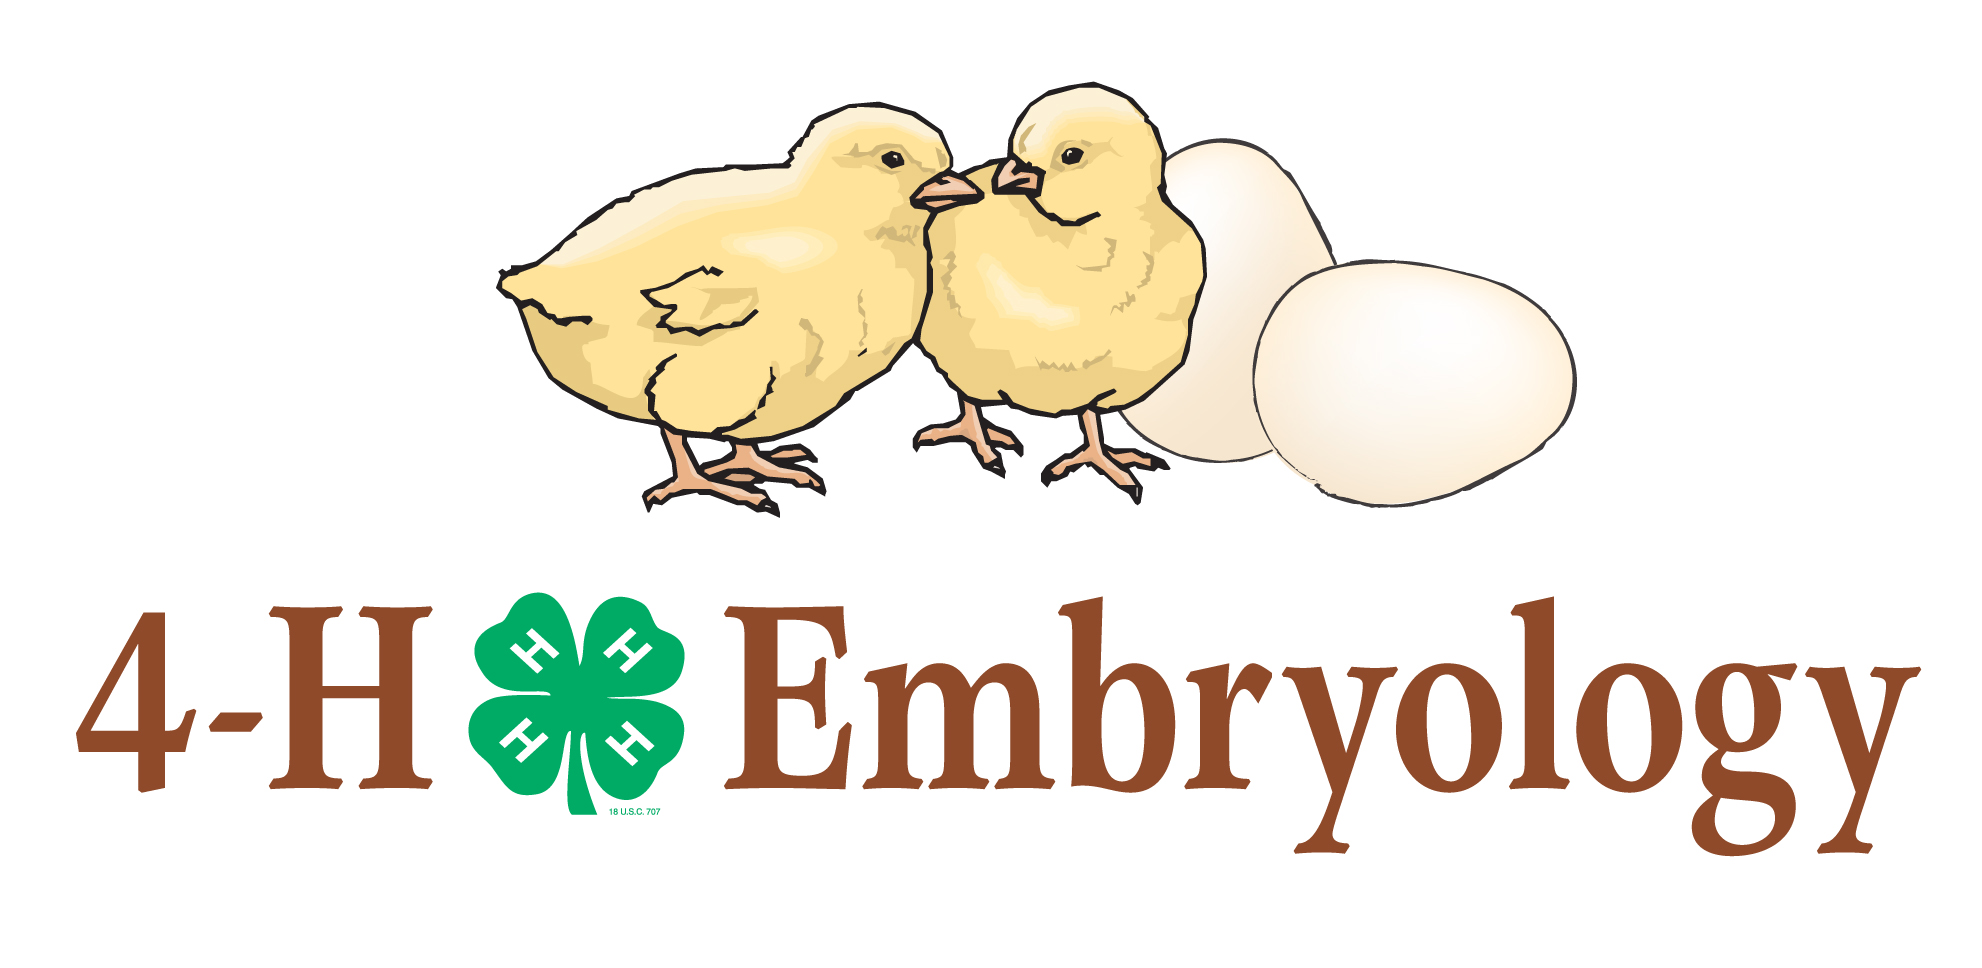 Click Here To Download All Embryology In The Classroom Clip Art